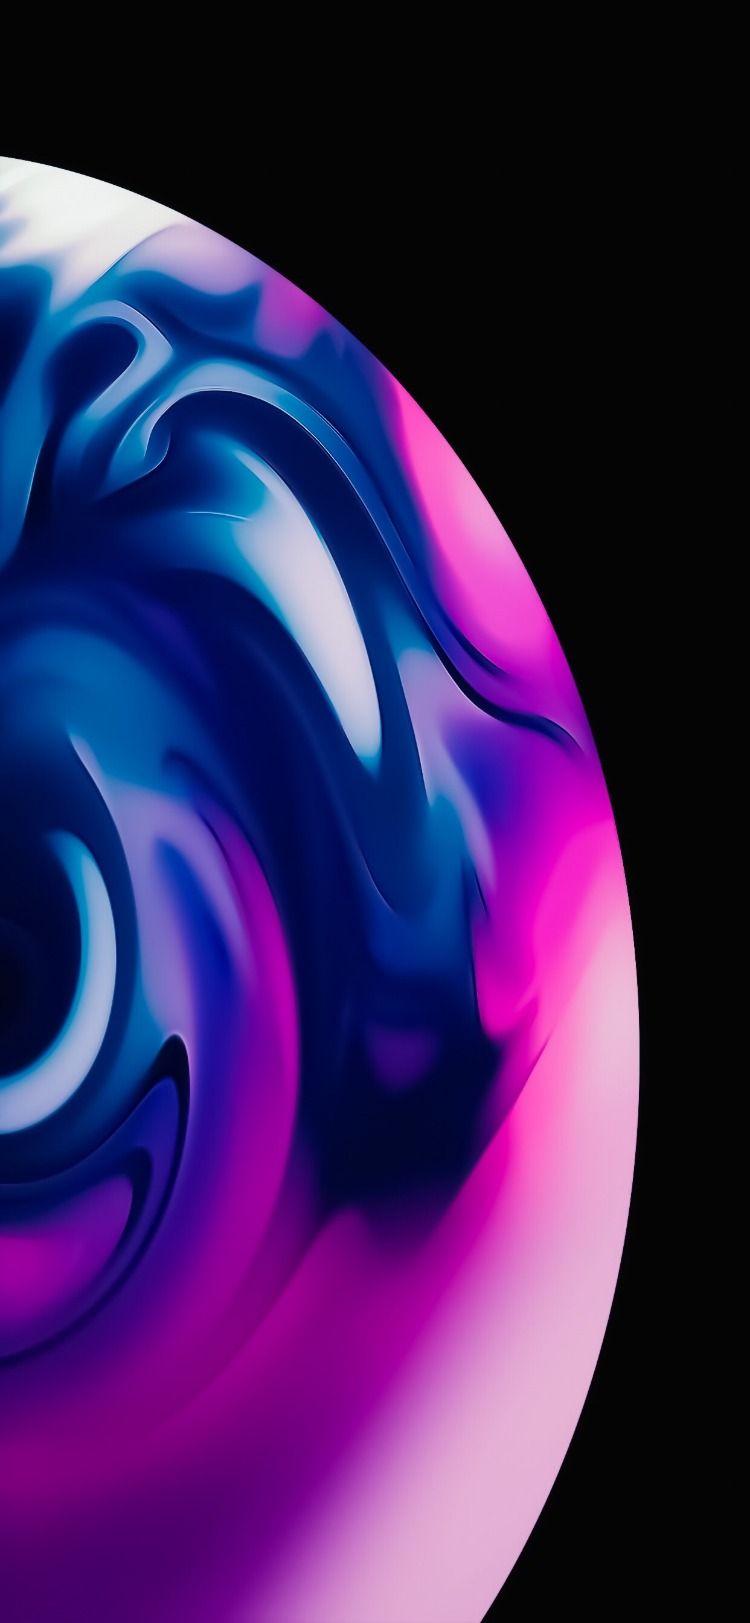 Abstract Wallpaper Download For iPhone & Android, Colorful